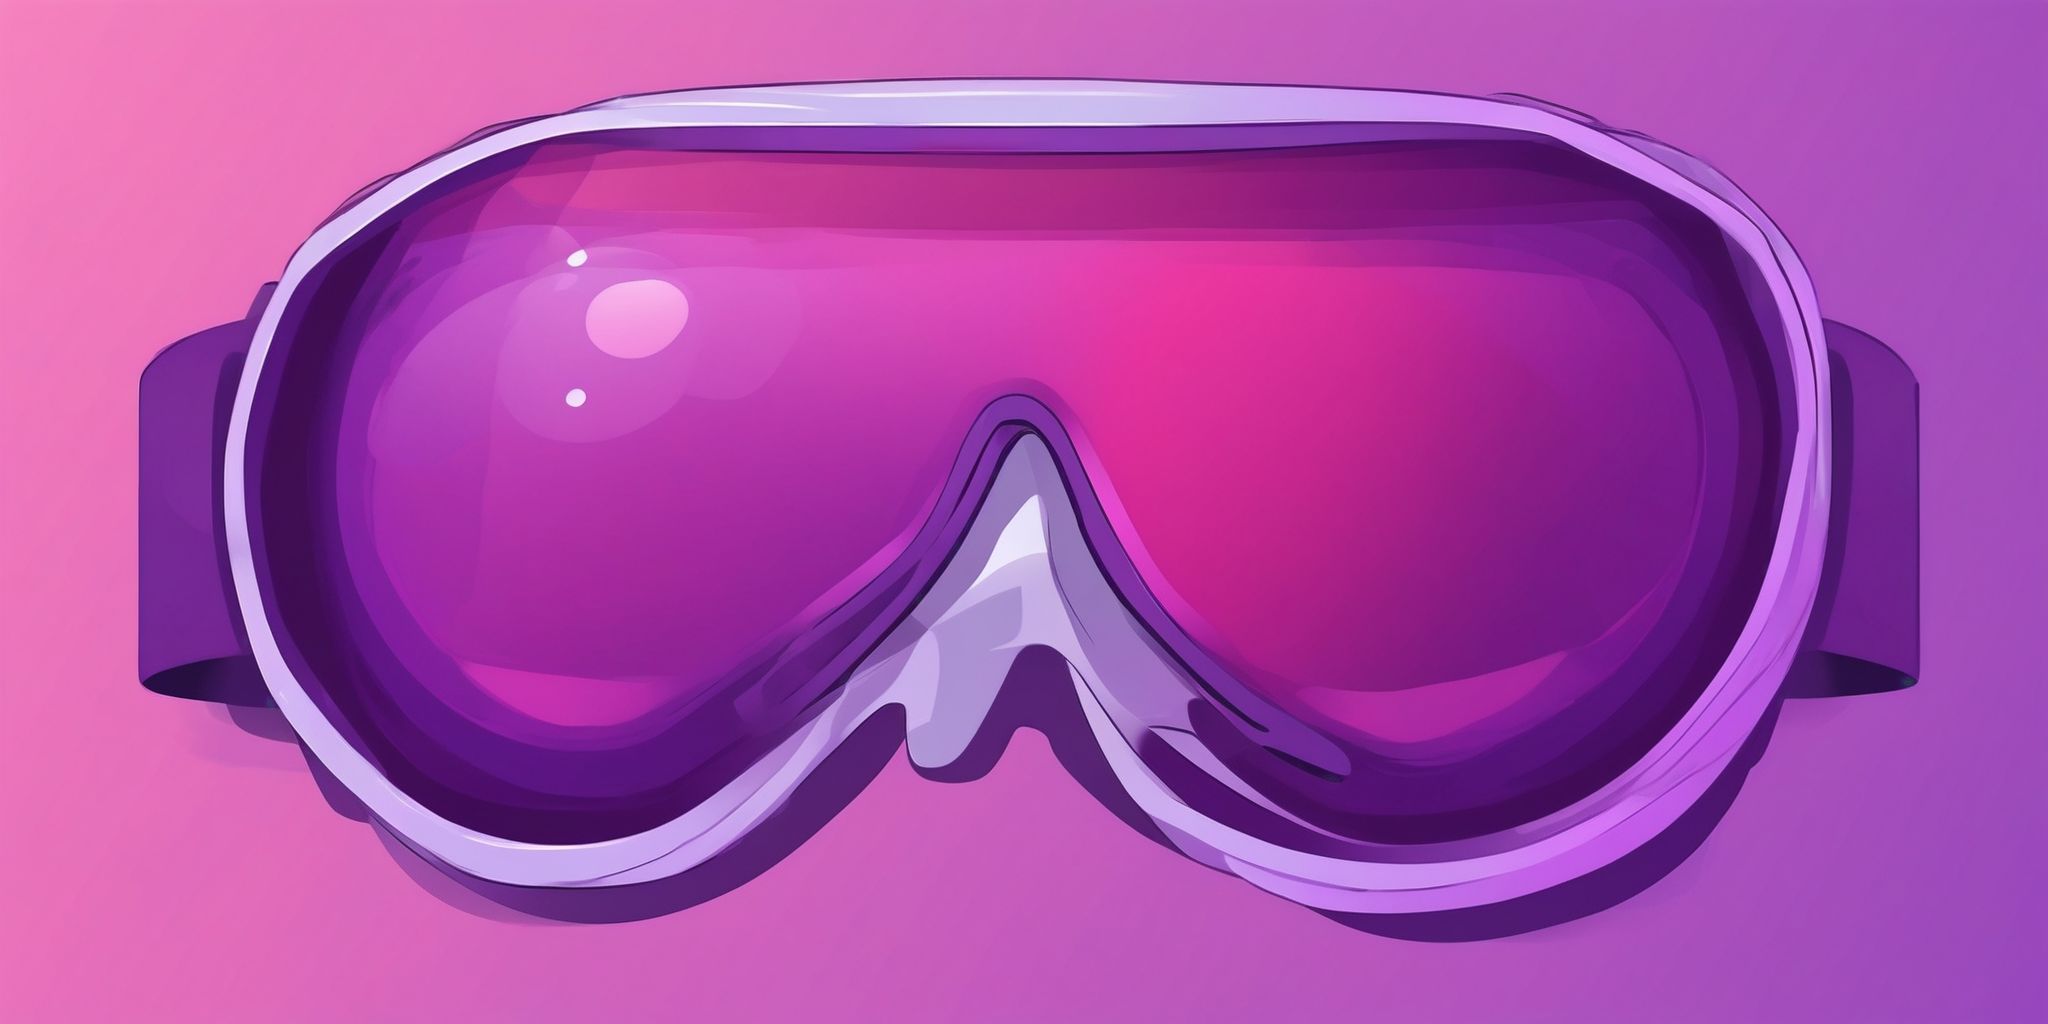 Goggles in flat illustration style, colorful purple gradient colors